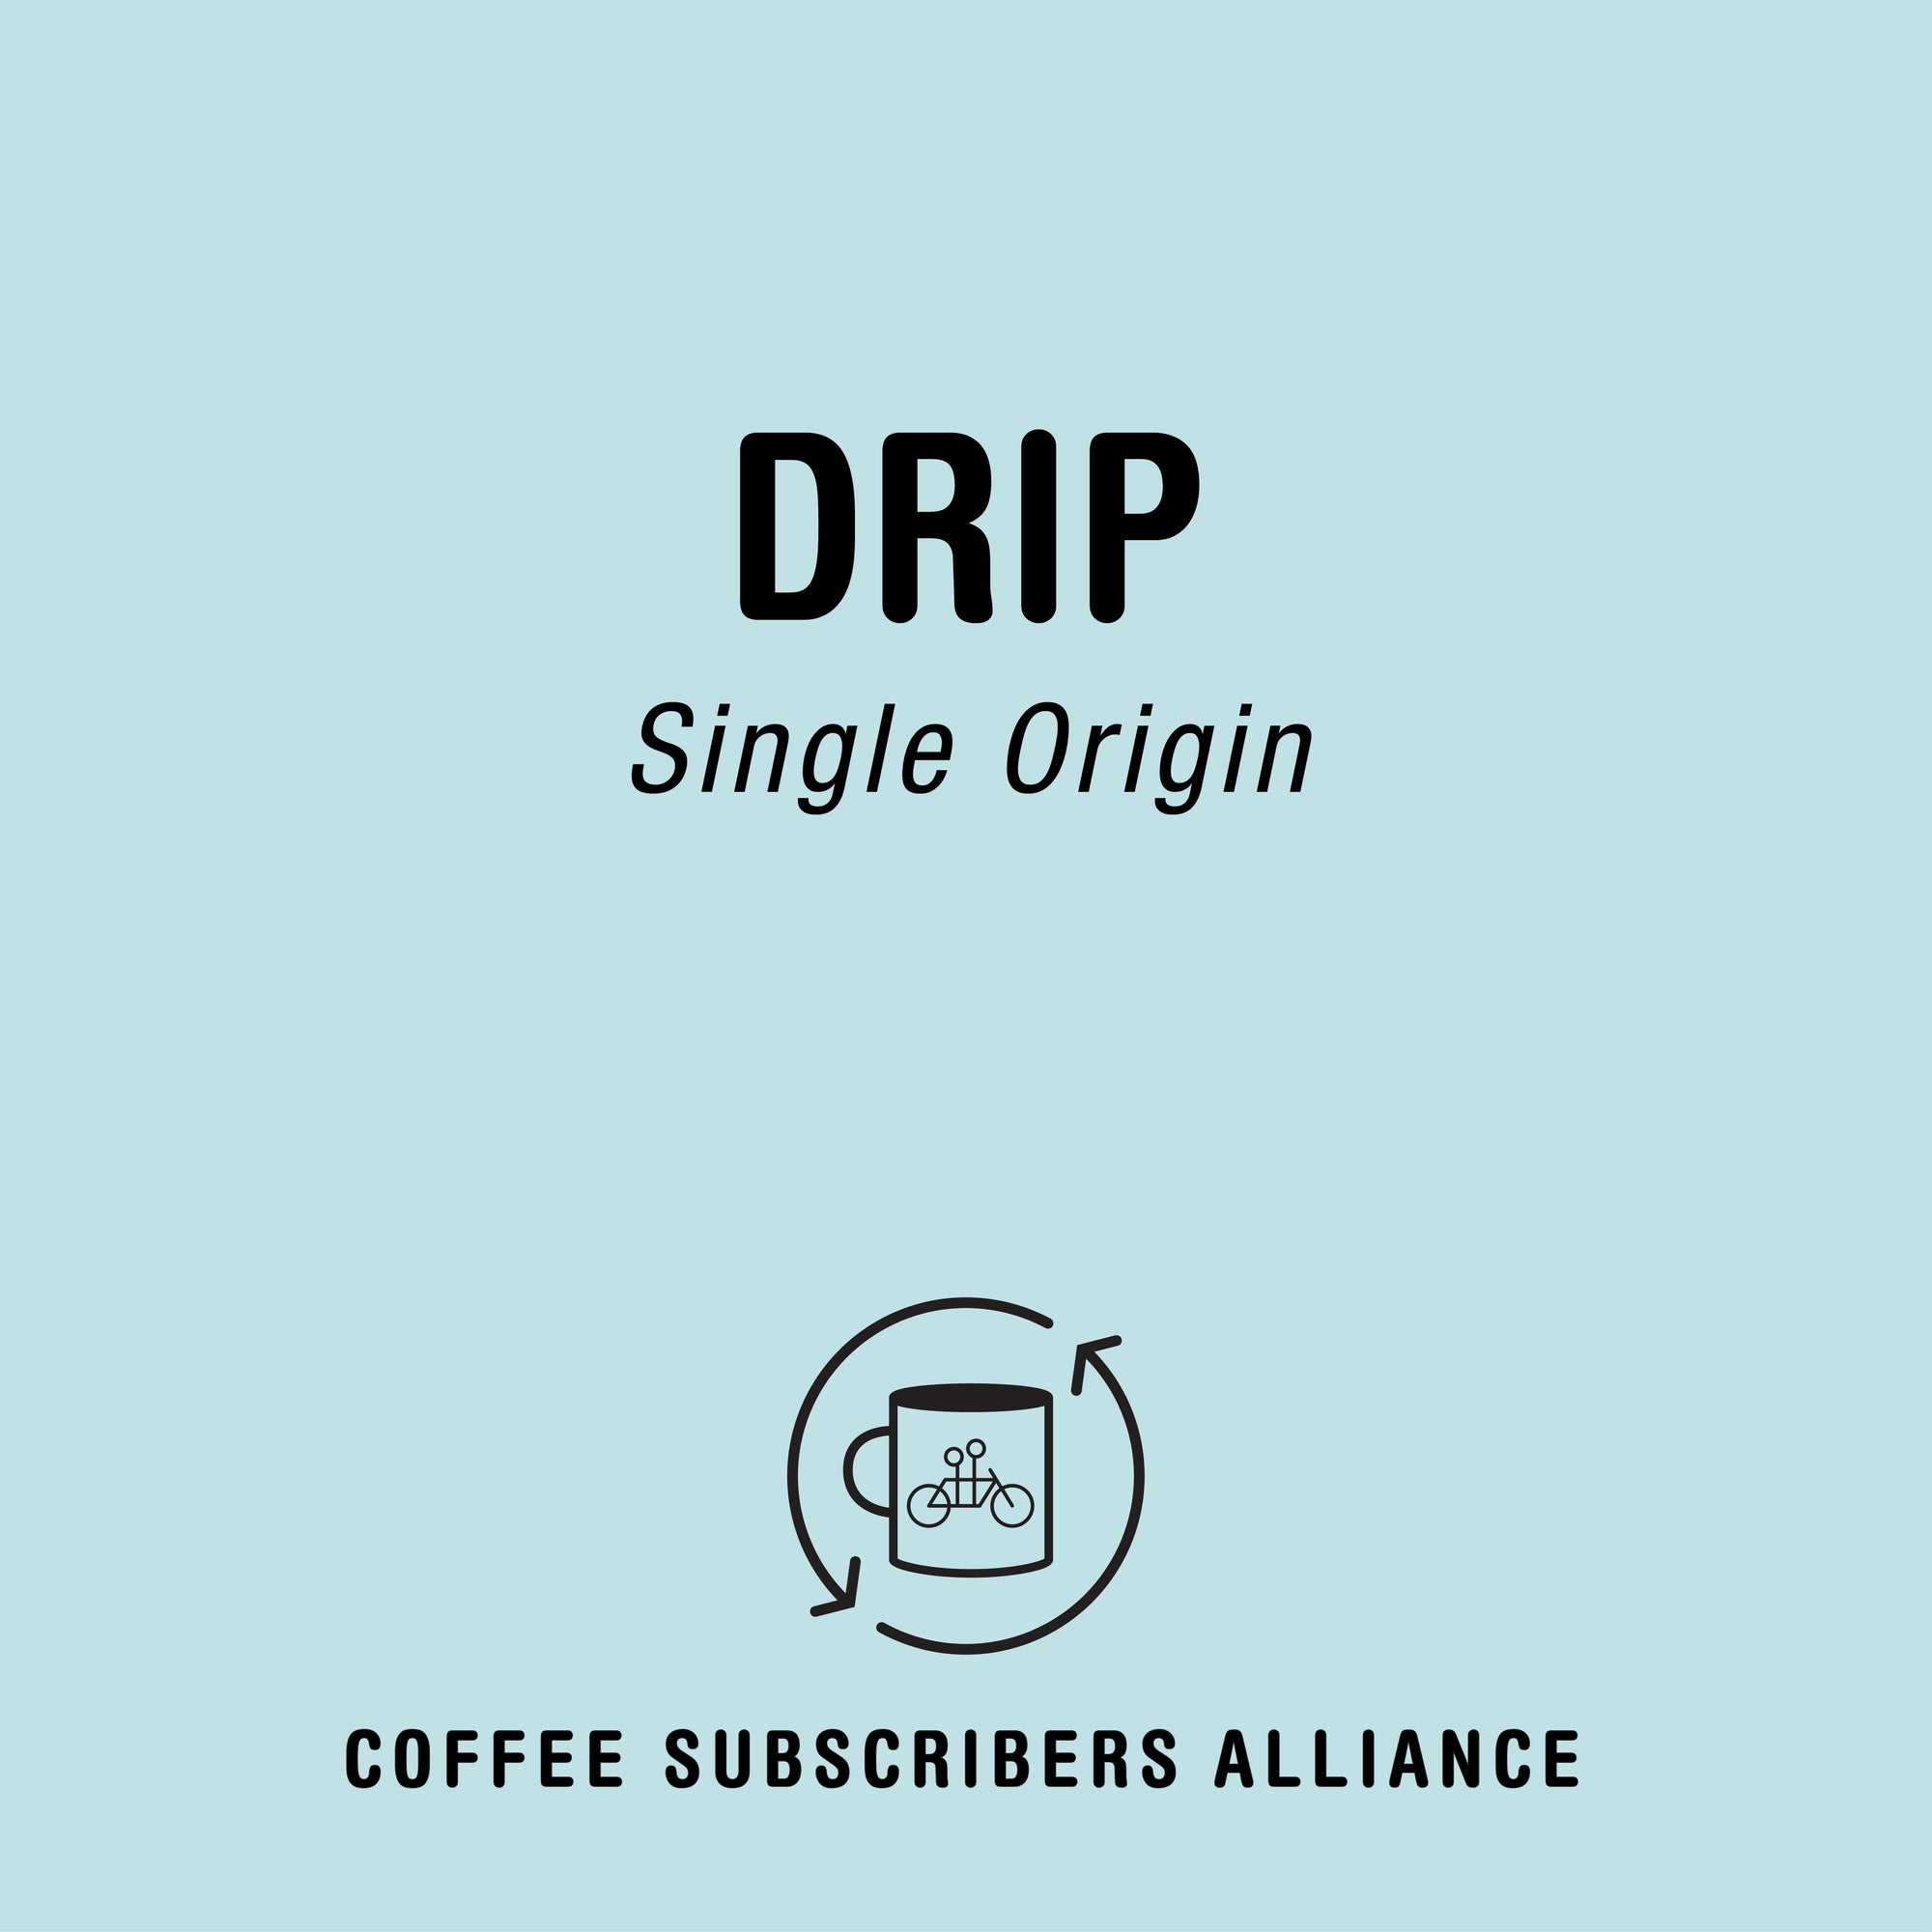 Logo for "Drip Subscription Gift - 4 Weeks x 6" featuring the text "single origin" above a stylized coffee cup encircled by the Tandem brand name, set against a pale blue background.